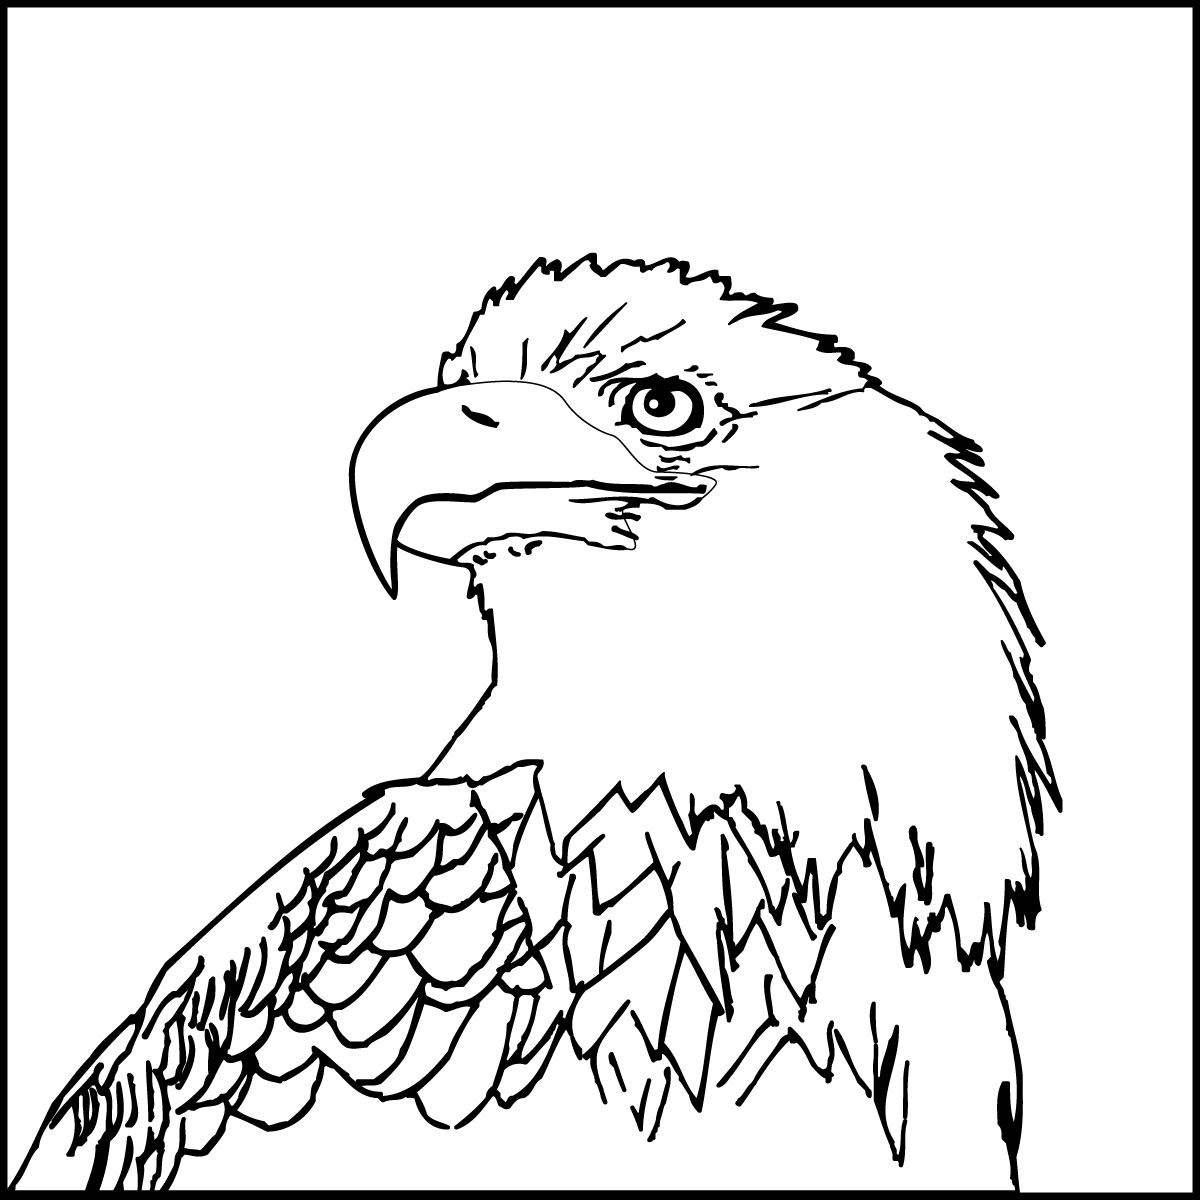 Bald eagle coloring pages for kids - Coloring Pages & Pictures ...